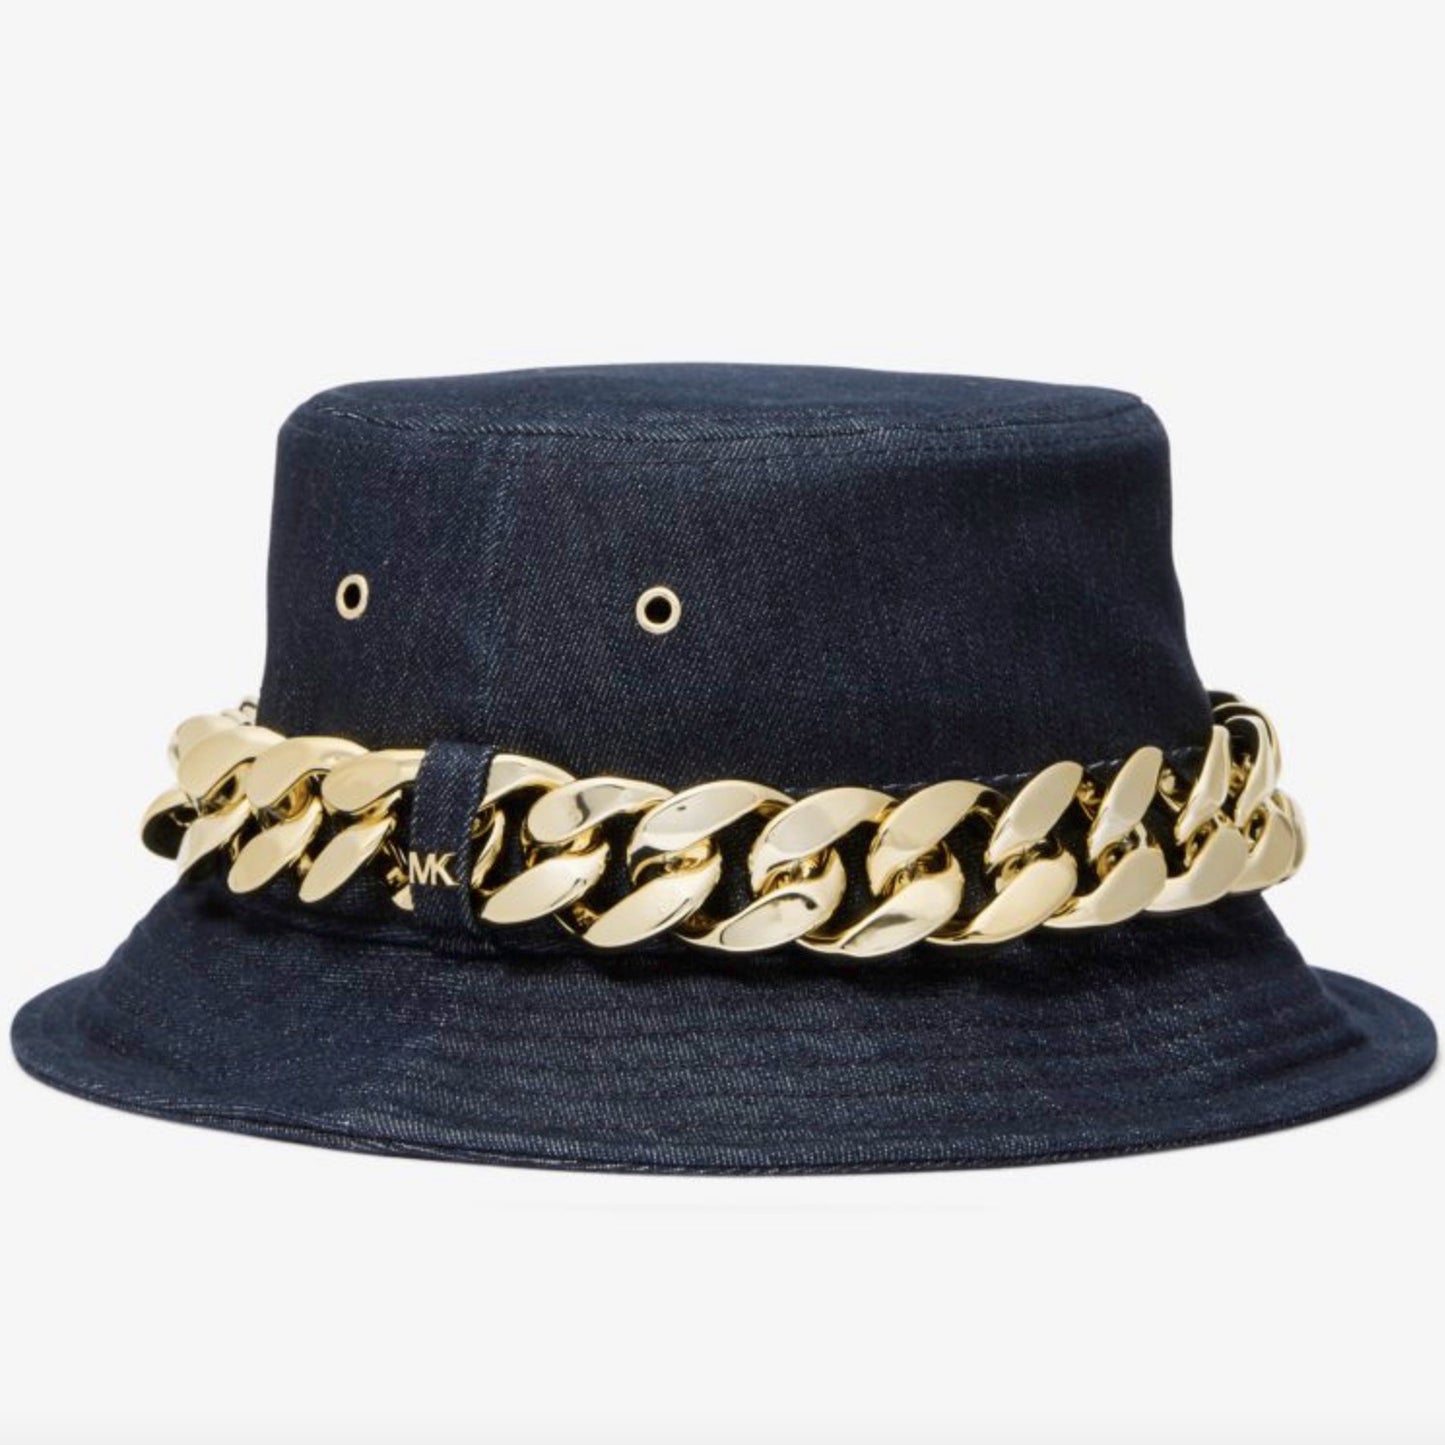 This bucket hat will make any outfit look effortlessly cool. Complete with a polished chain link and logo accent, it’s one of the season’s must-have accessories. Wear it to make a stylish statement—whether with a weekend ensemble or to catch some shade on a sunny day. 